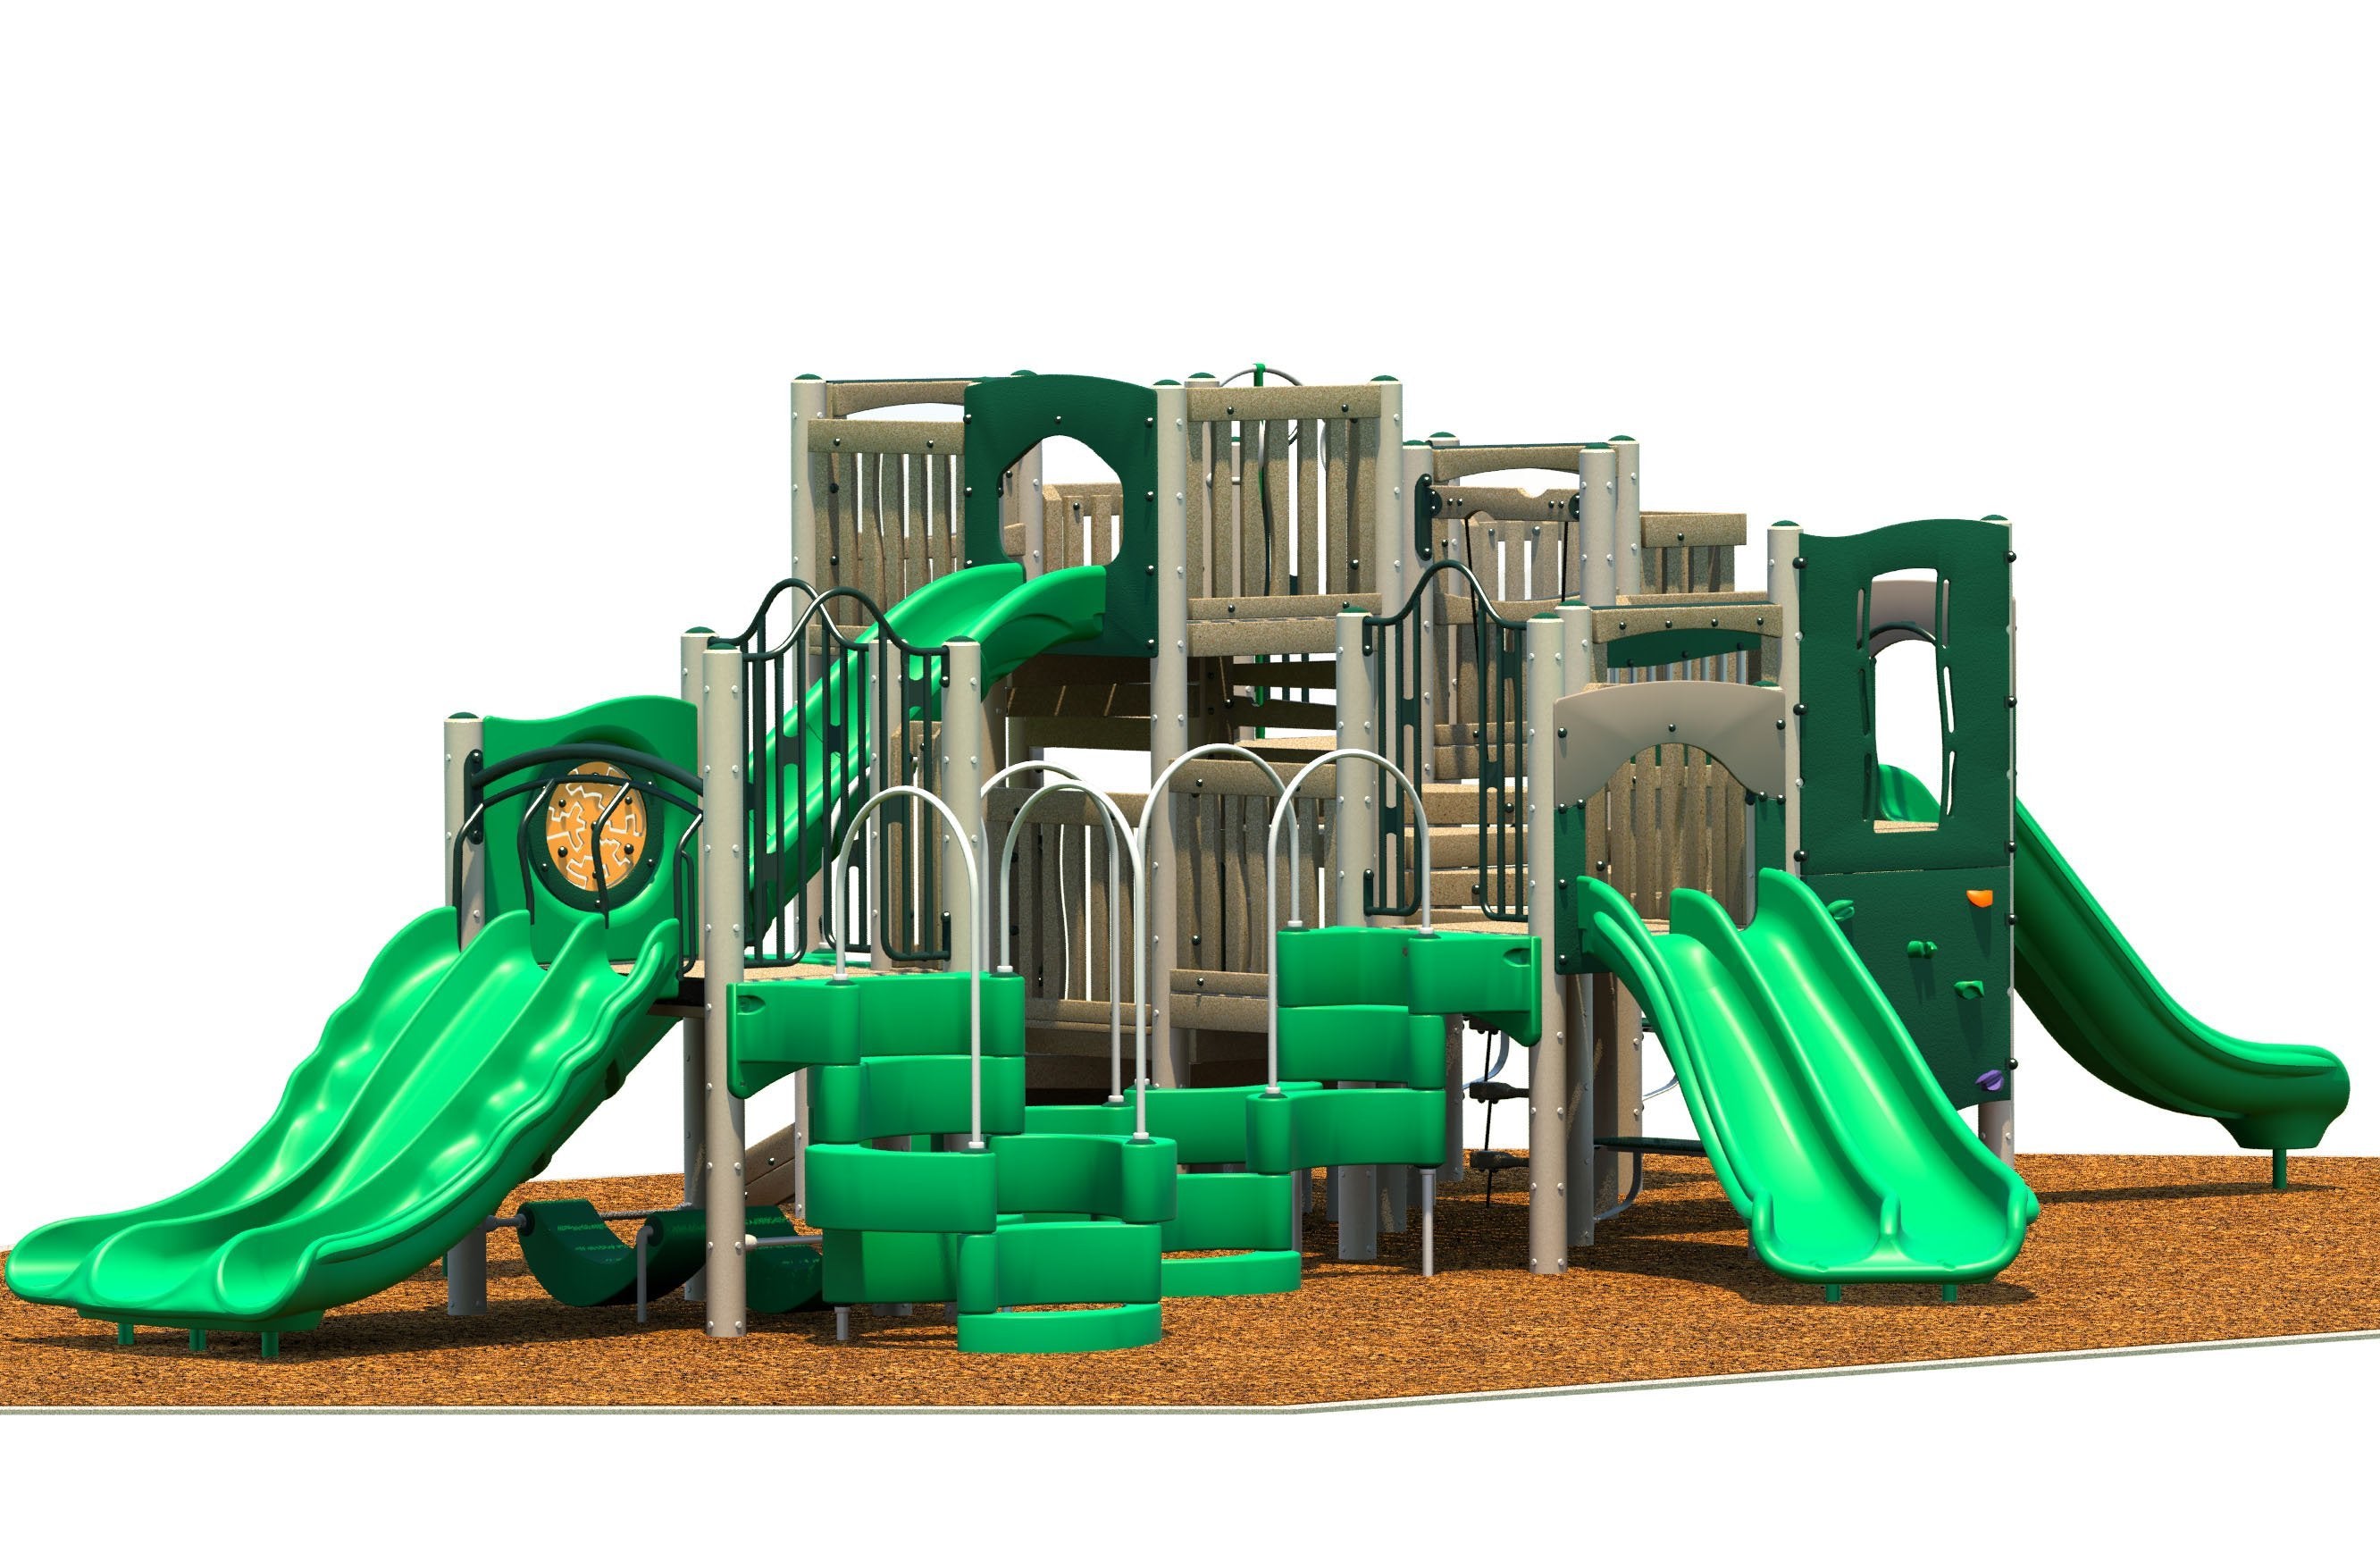 Conundrum Play System  | WillyGoat Playground & Park Equipment